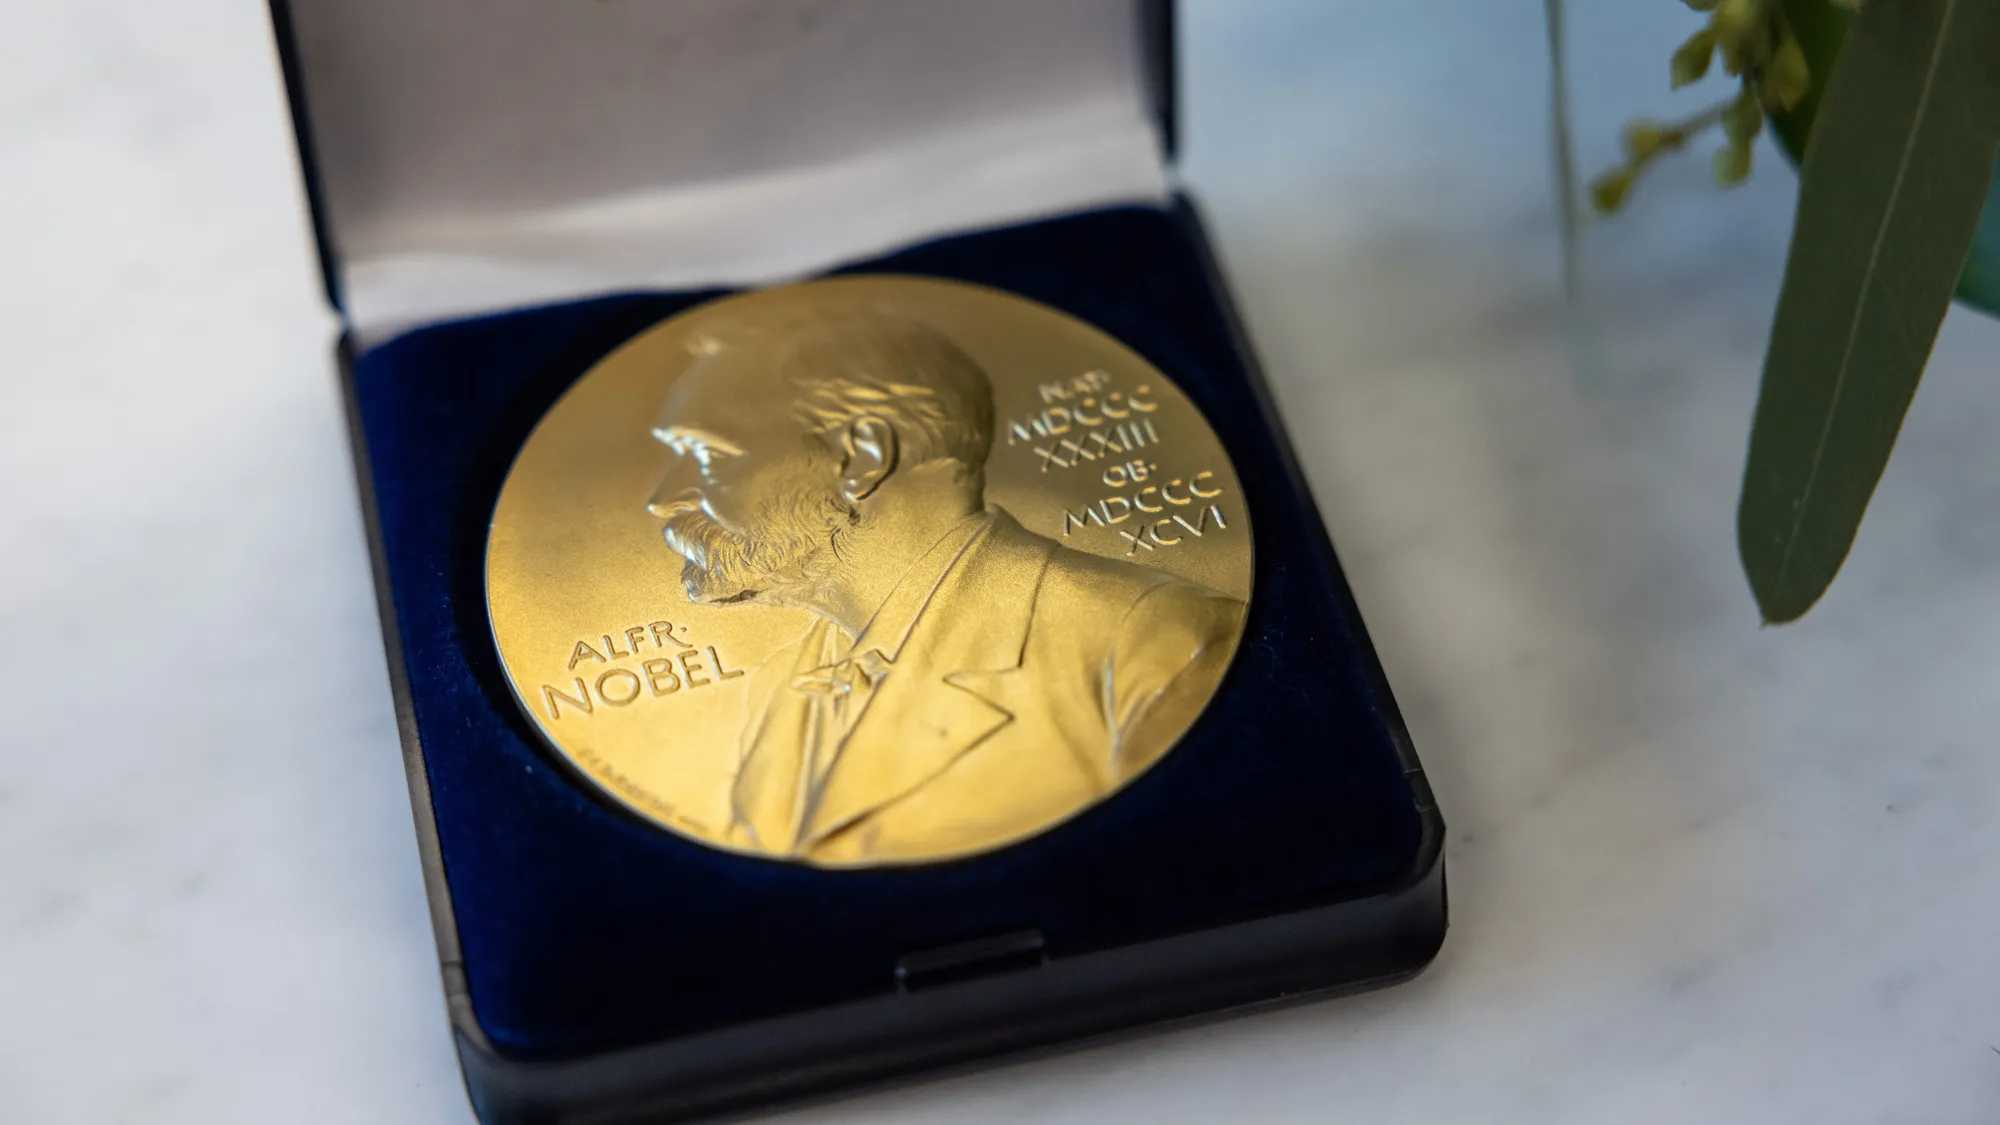 A replica Nobel Prize medal gifted to Ohio State by Pierre Agostini resembles a penny with its raised text and profile of Alfred Nobel, but it is closer to palm-sized. It sits in a velvet-lined, open box that resembles a ring box. 